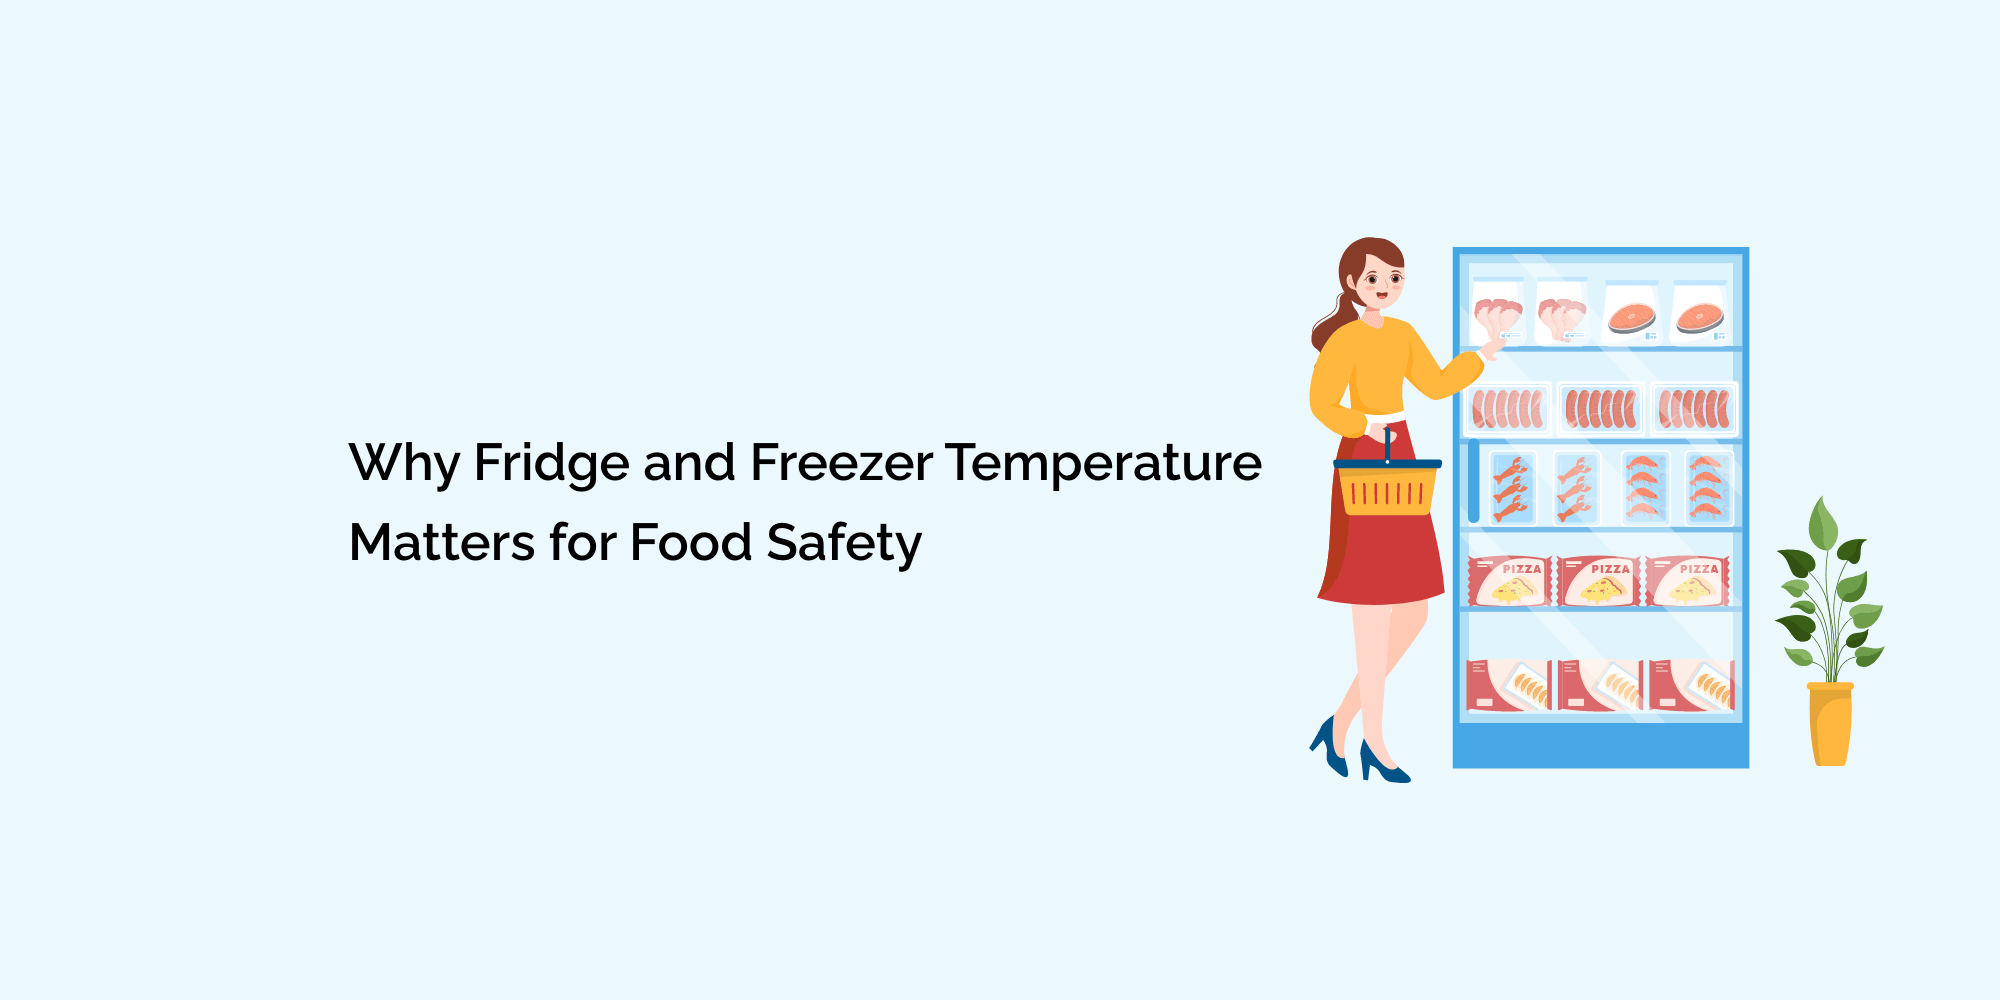 Why Fridge and Freezer Temperature Matters for Food Safety